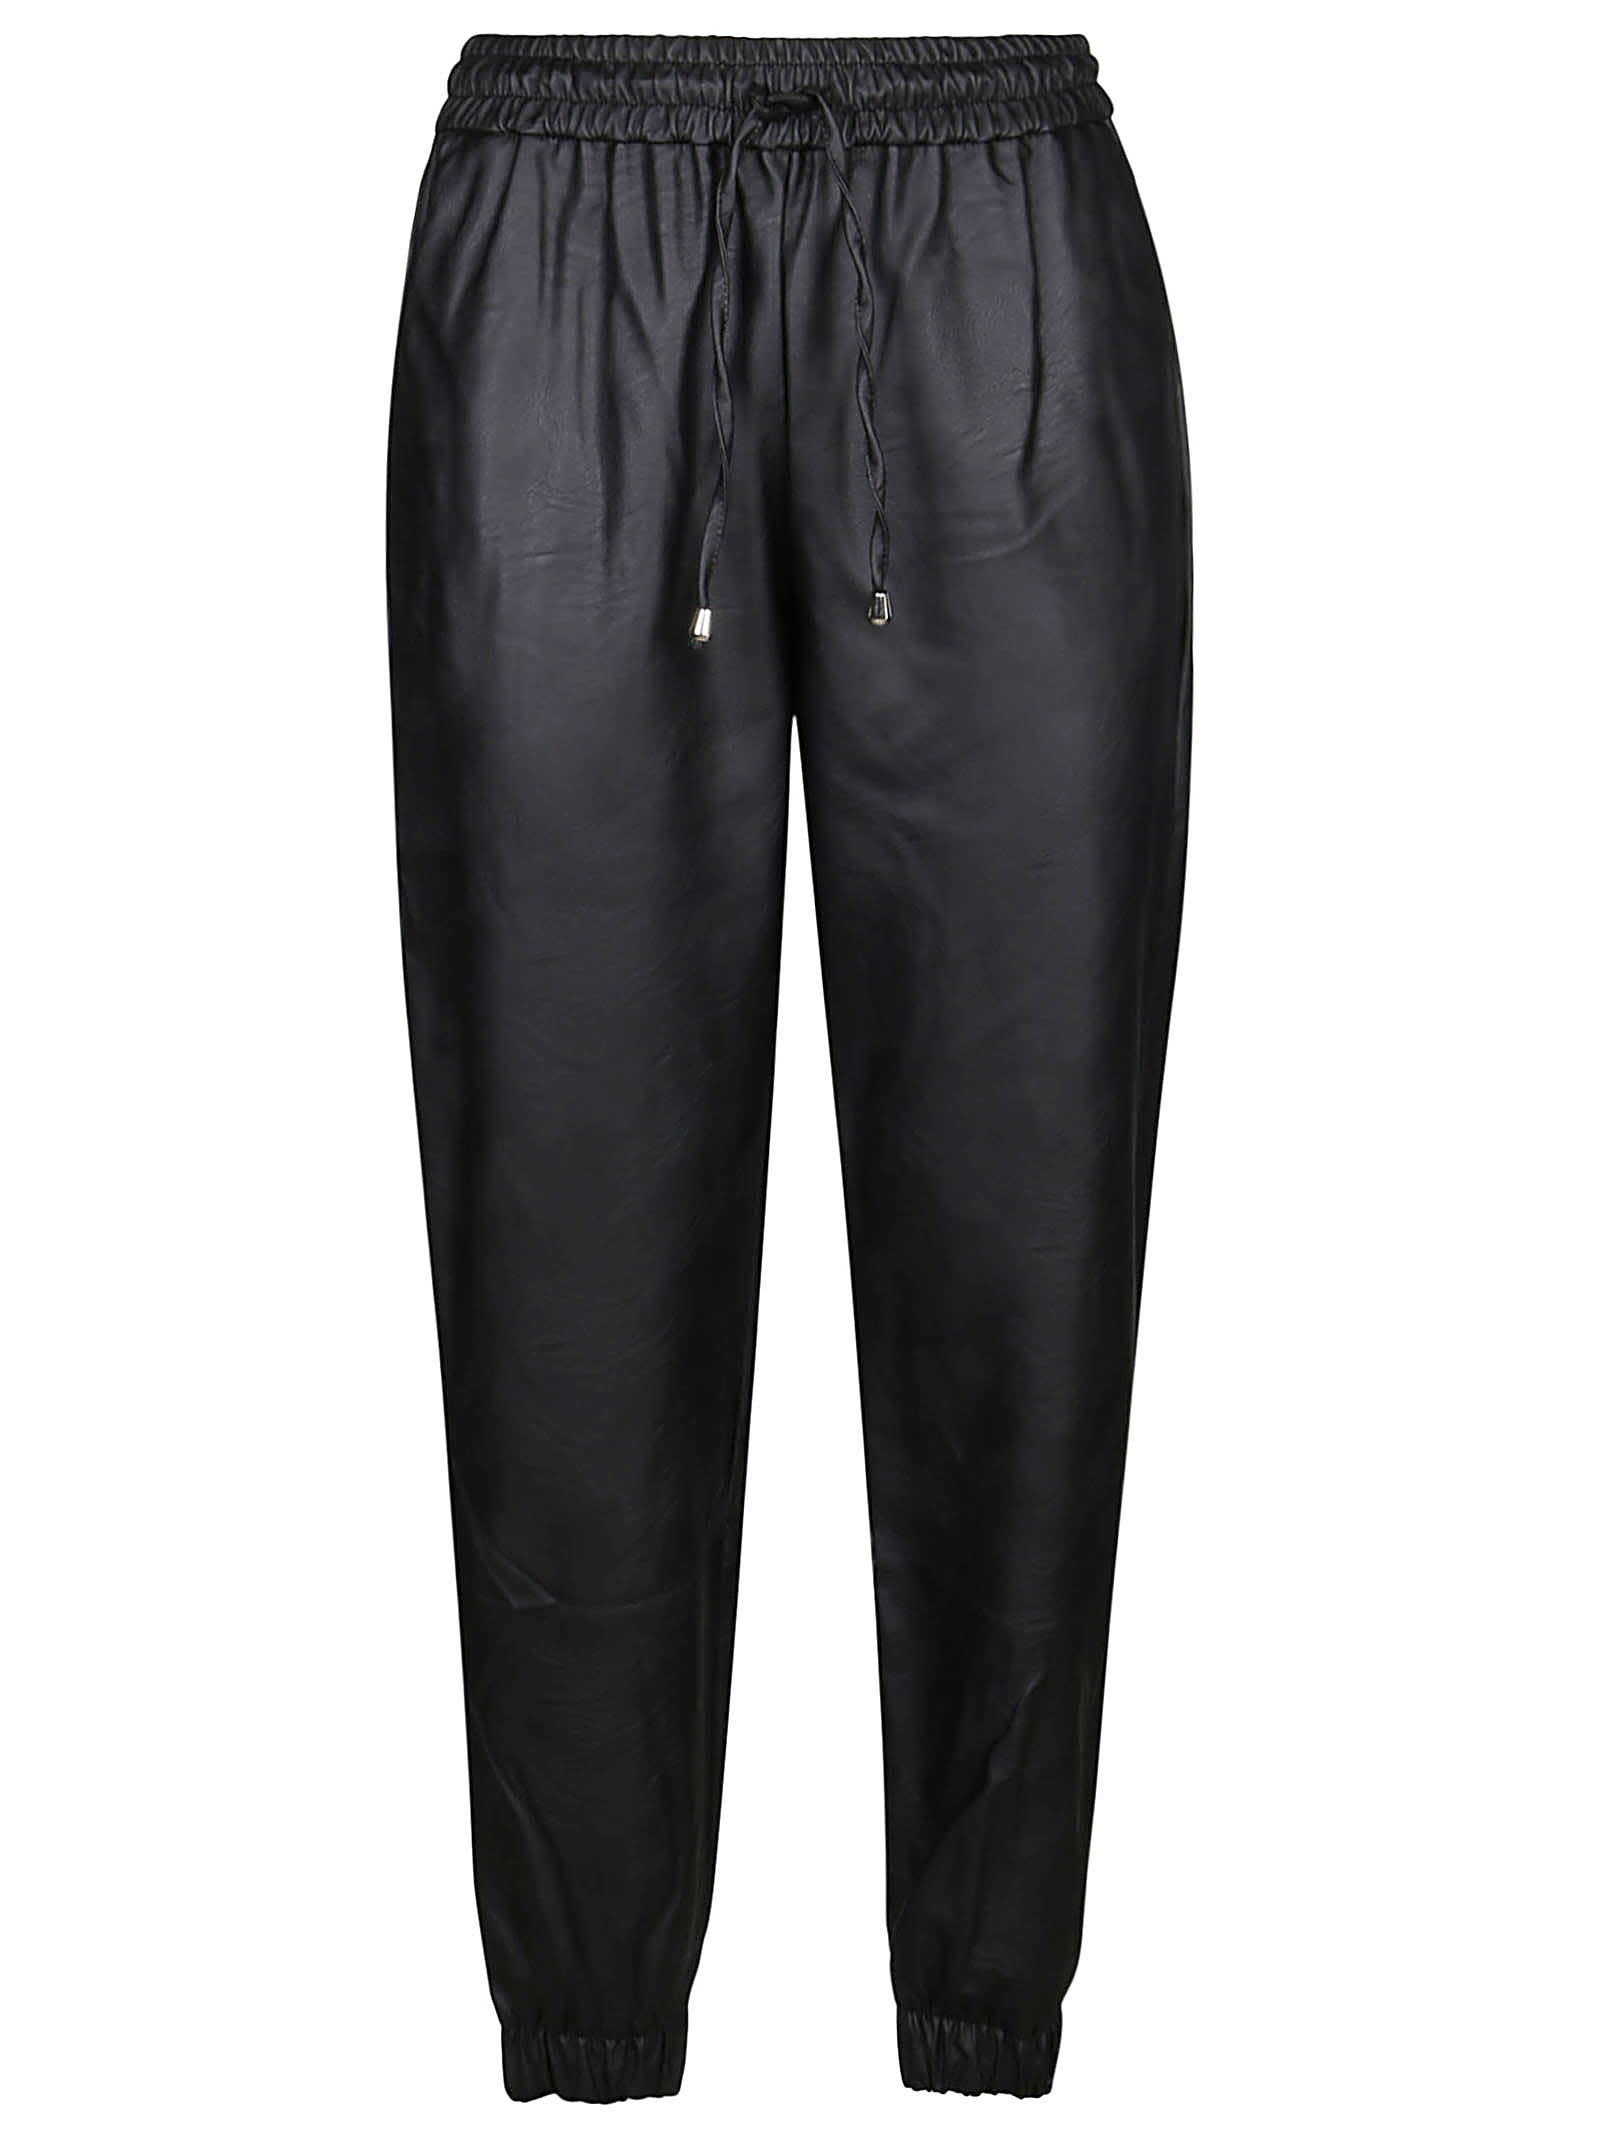 Snobby Sheep Pleather Pant